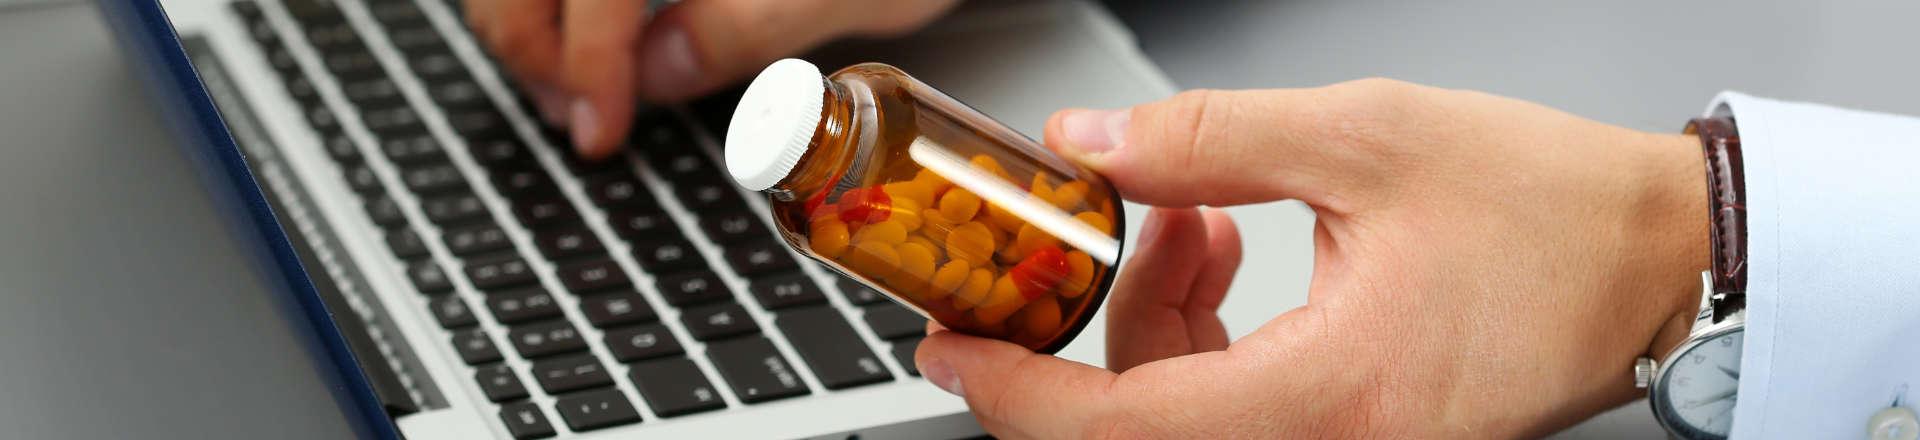 a person at a laptop holding a bottle with medicines in their hand